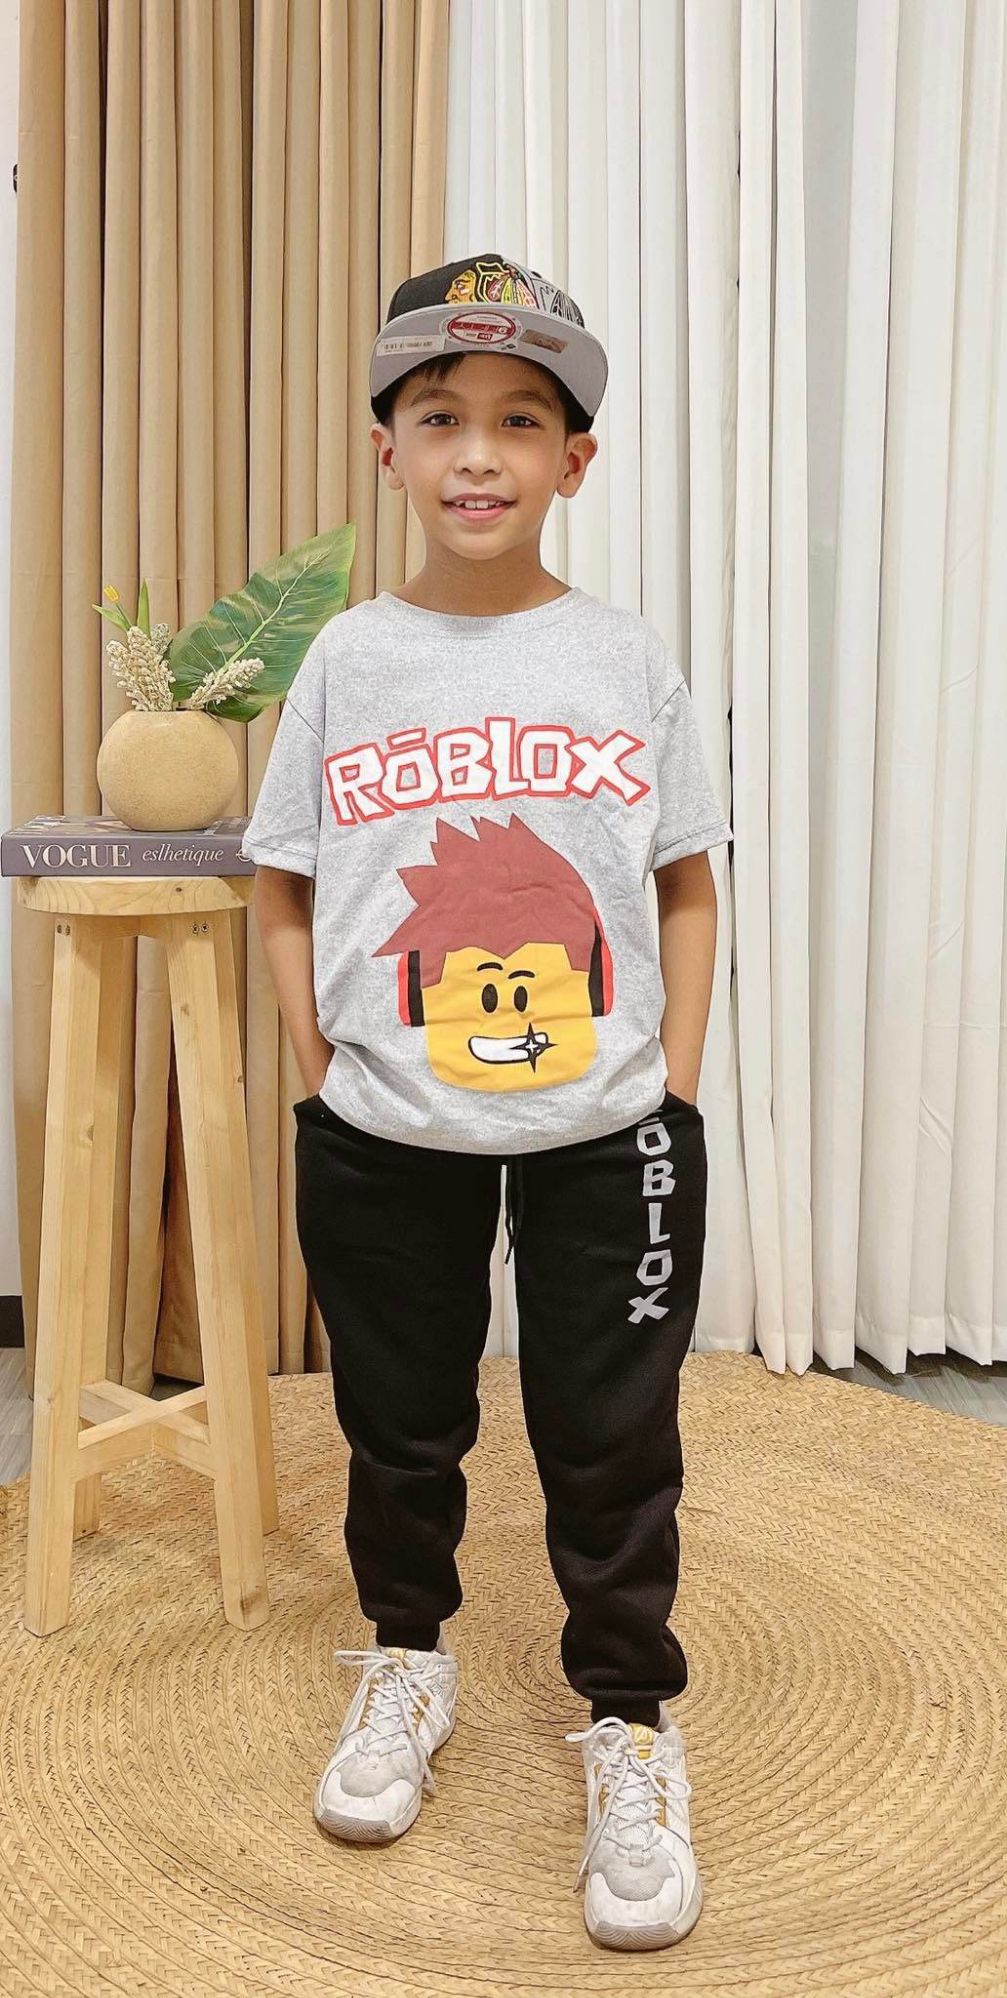 ROBLOX T-SHIRT TERNO FOR BOY KIDS/(fit up to 7-10 years old)